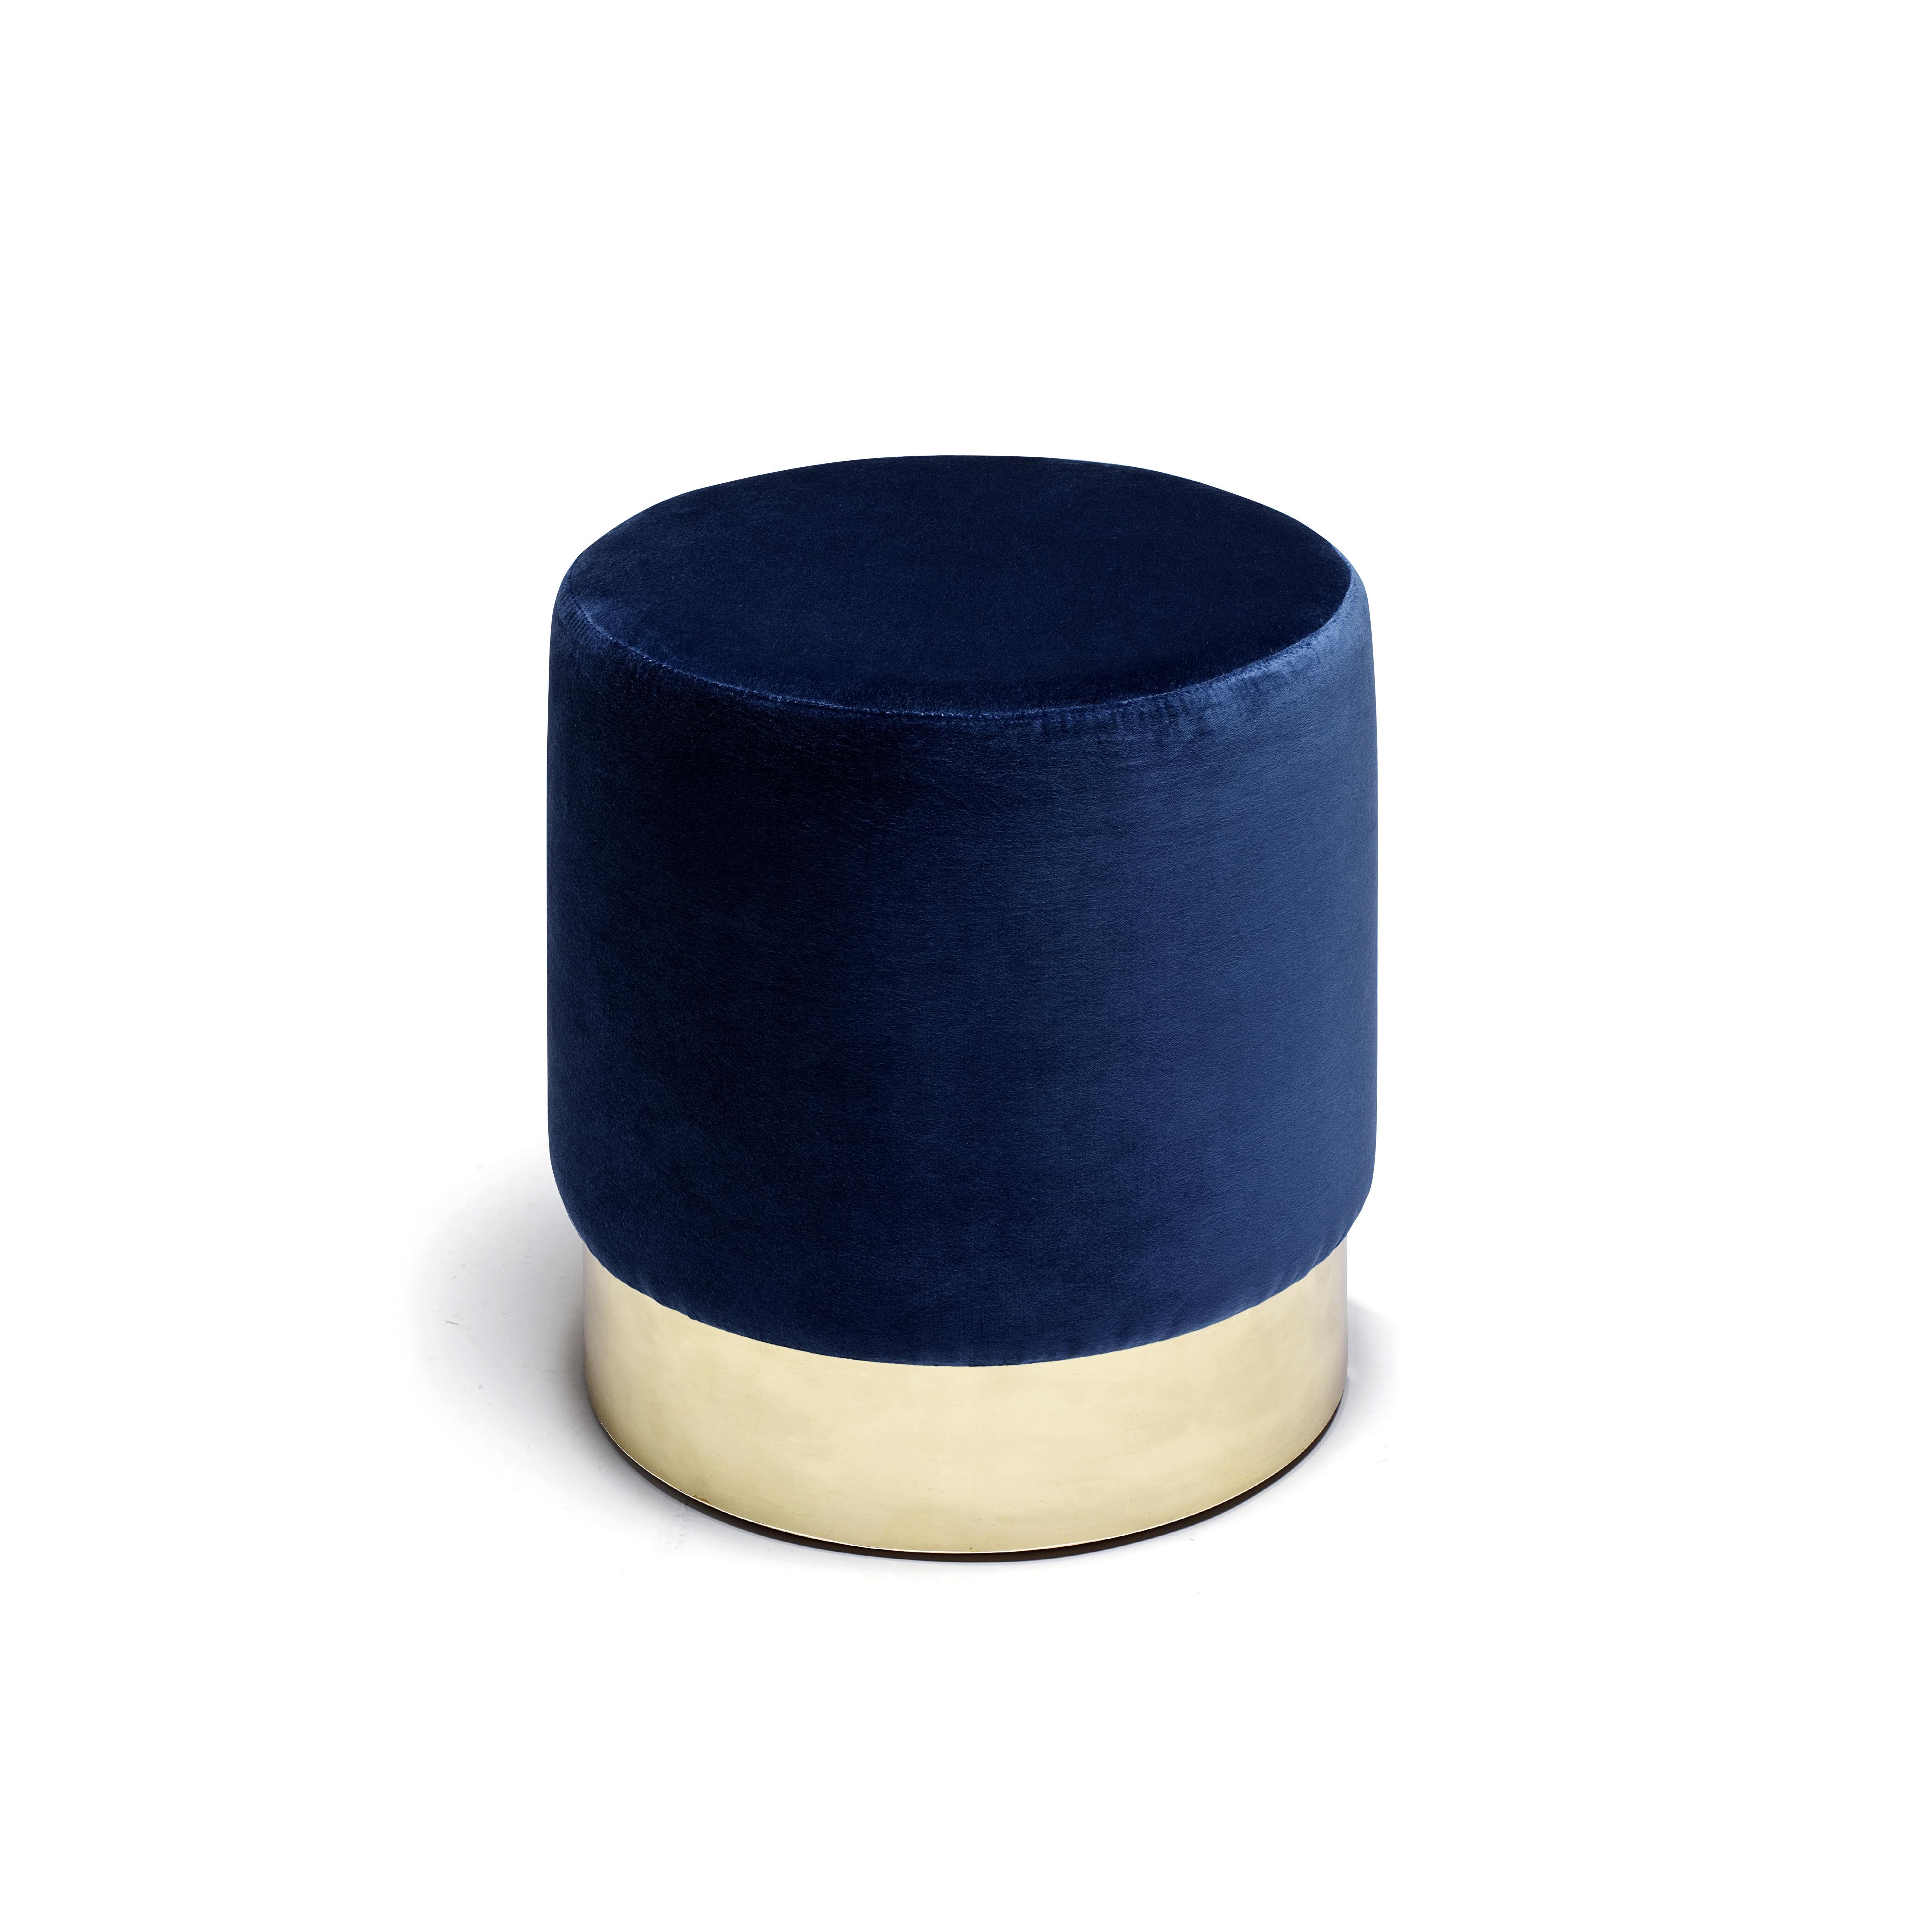 Lune C Stool, Velvet Upholstery and Polished Brass, Handcrafted by Duistt

LUNE C stool, crafted with great attention to details, is a very beautiful and versatile piece, which can be used as a stool or, if you put the wood tray on it, as a small